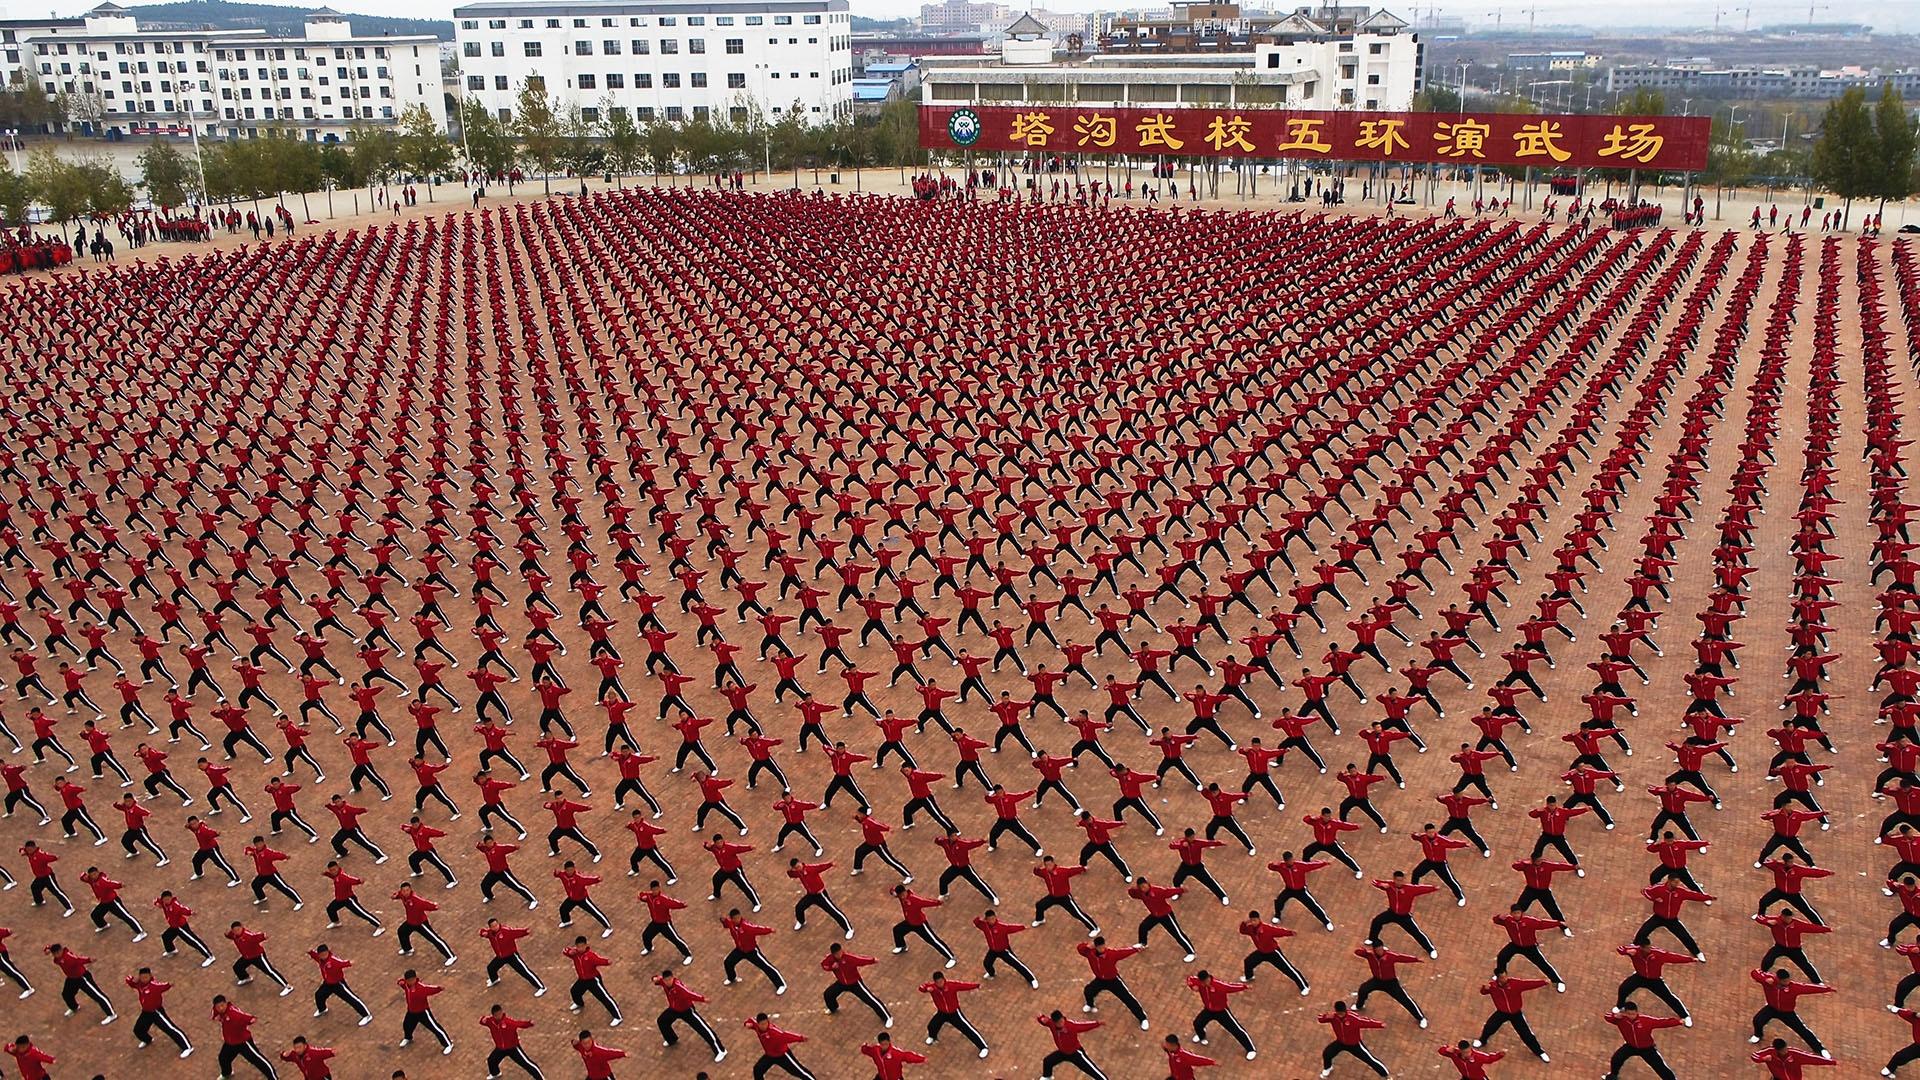 Image of students in China moving in unison.